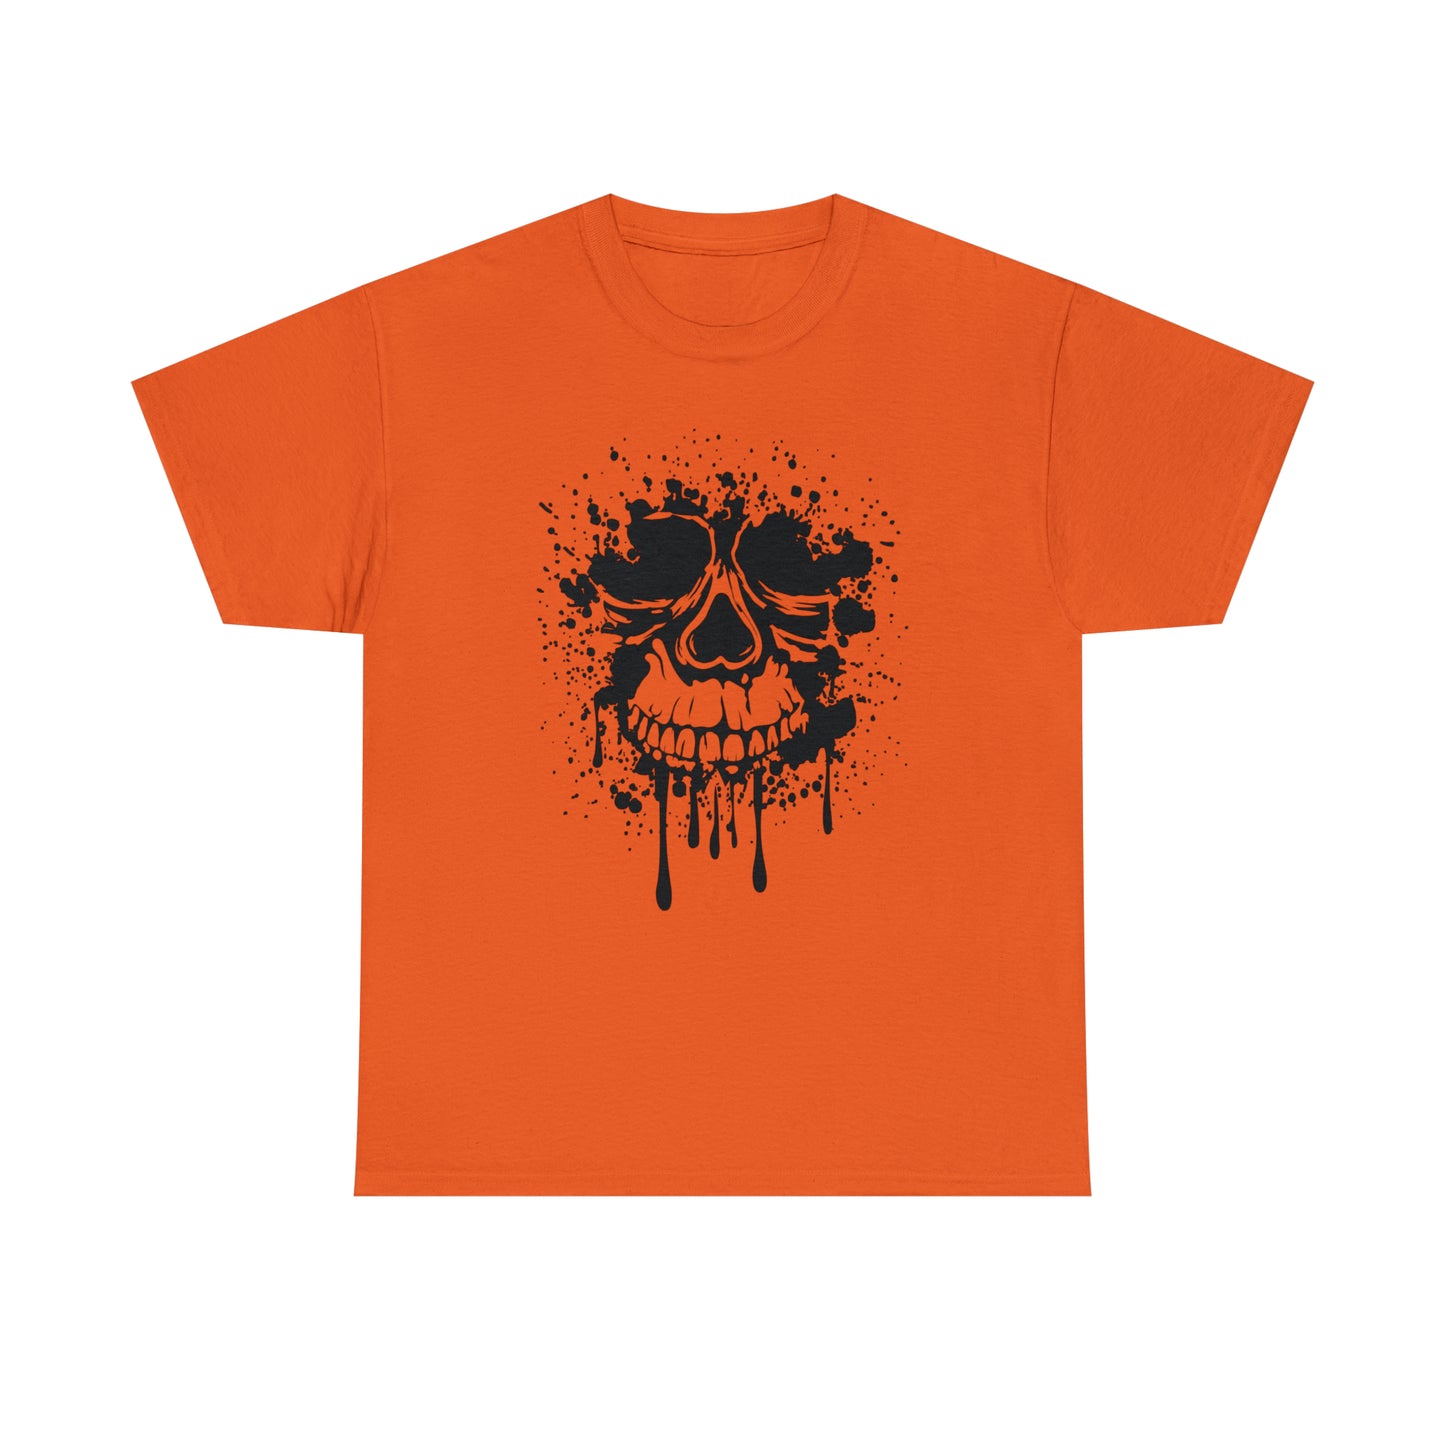 Skull Tattoo T-Shirt For Scary Costume T Shirt For Halloween TShirt For Graphic Tee